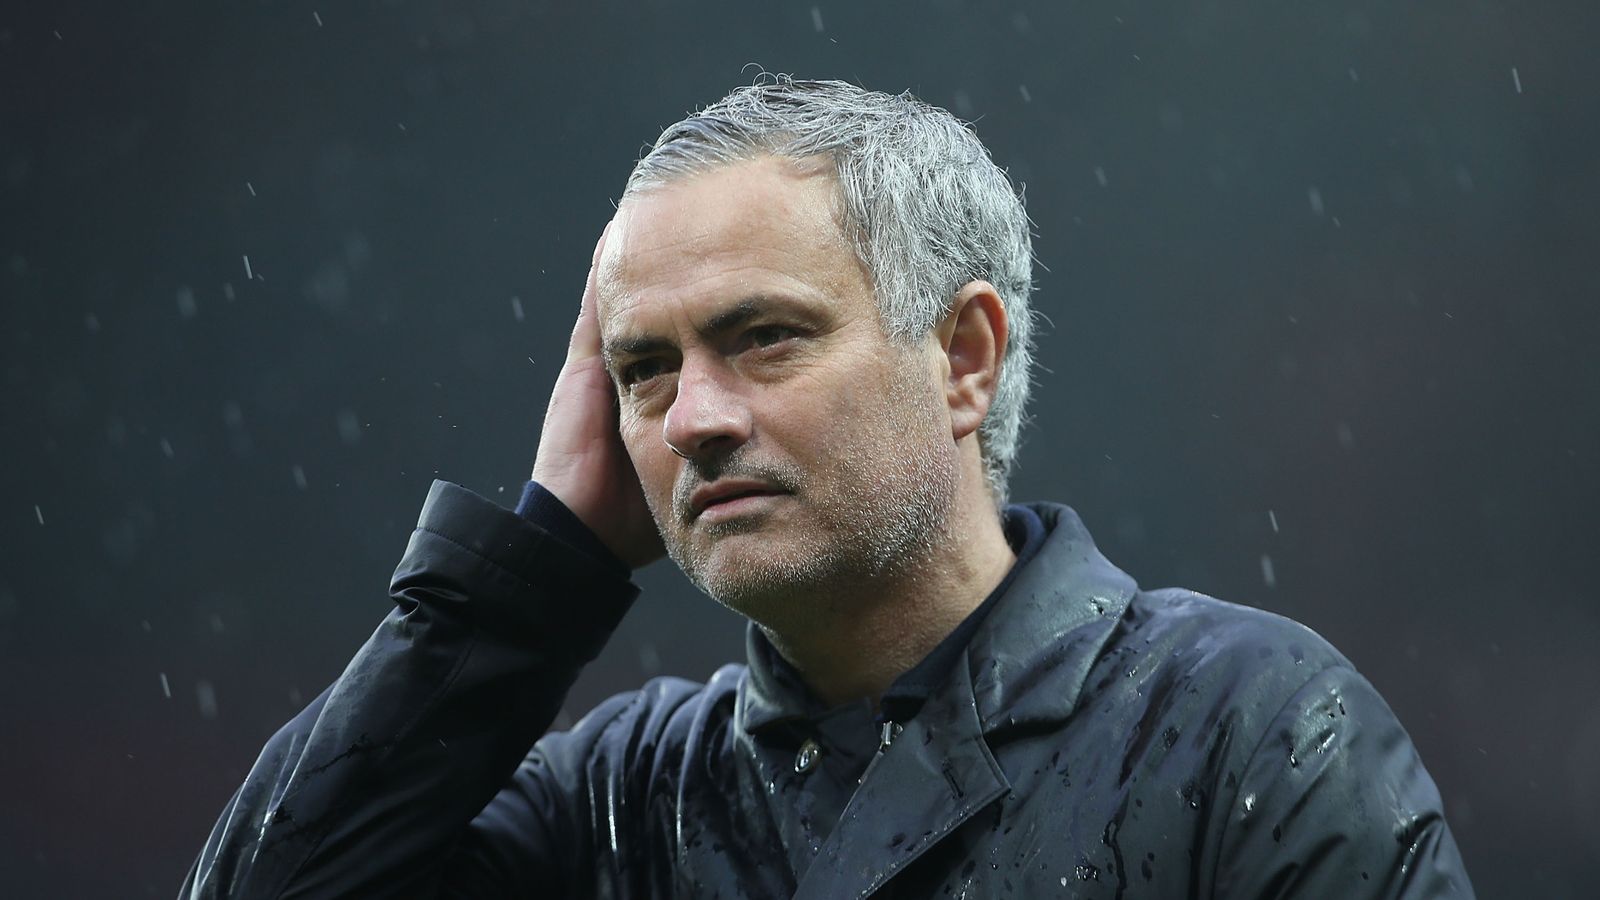 Jose Mourinho tells Manchester United: I know how to win | Football ...